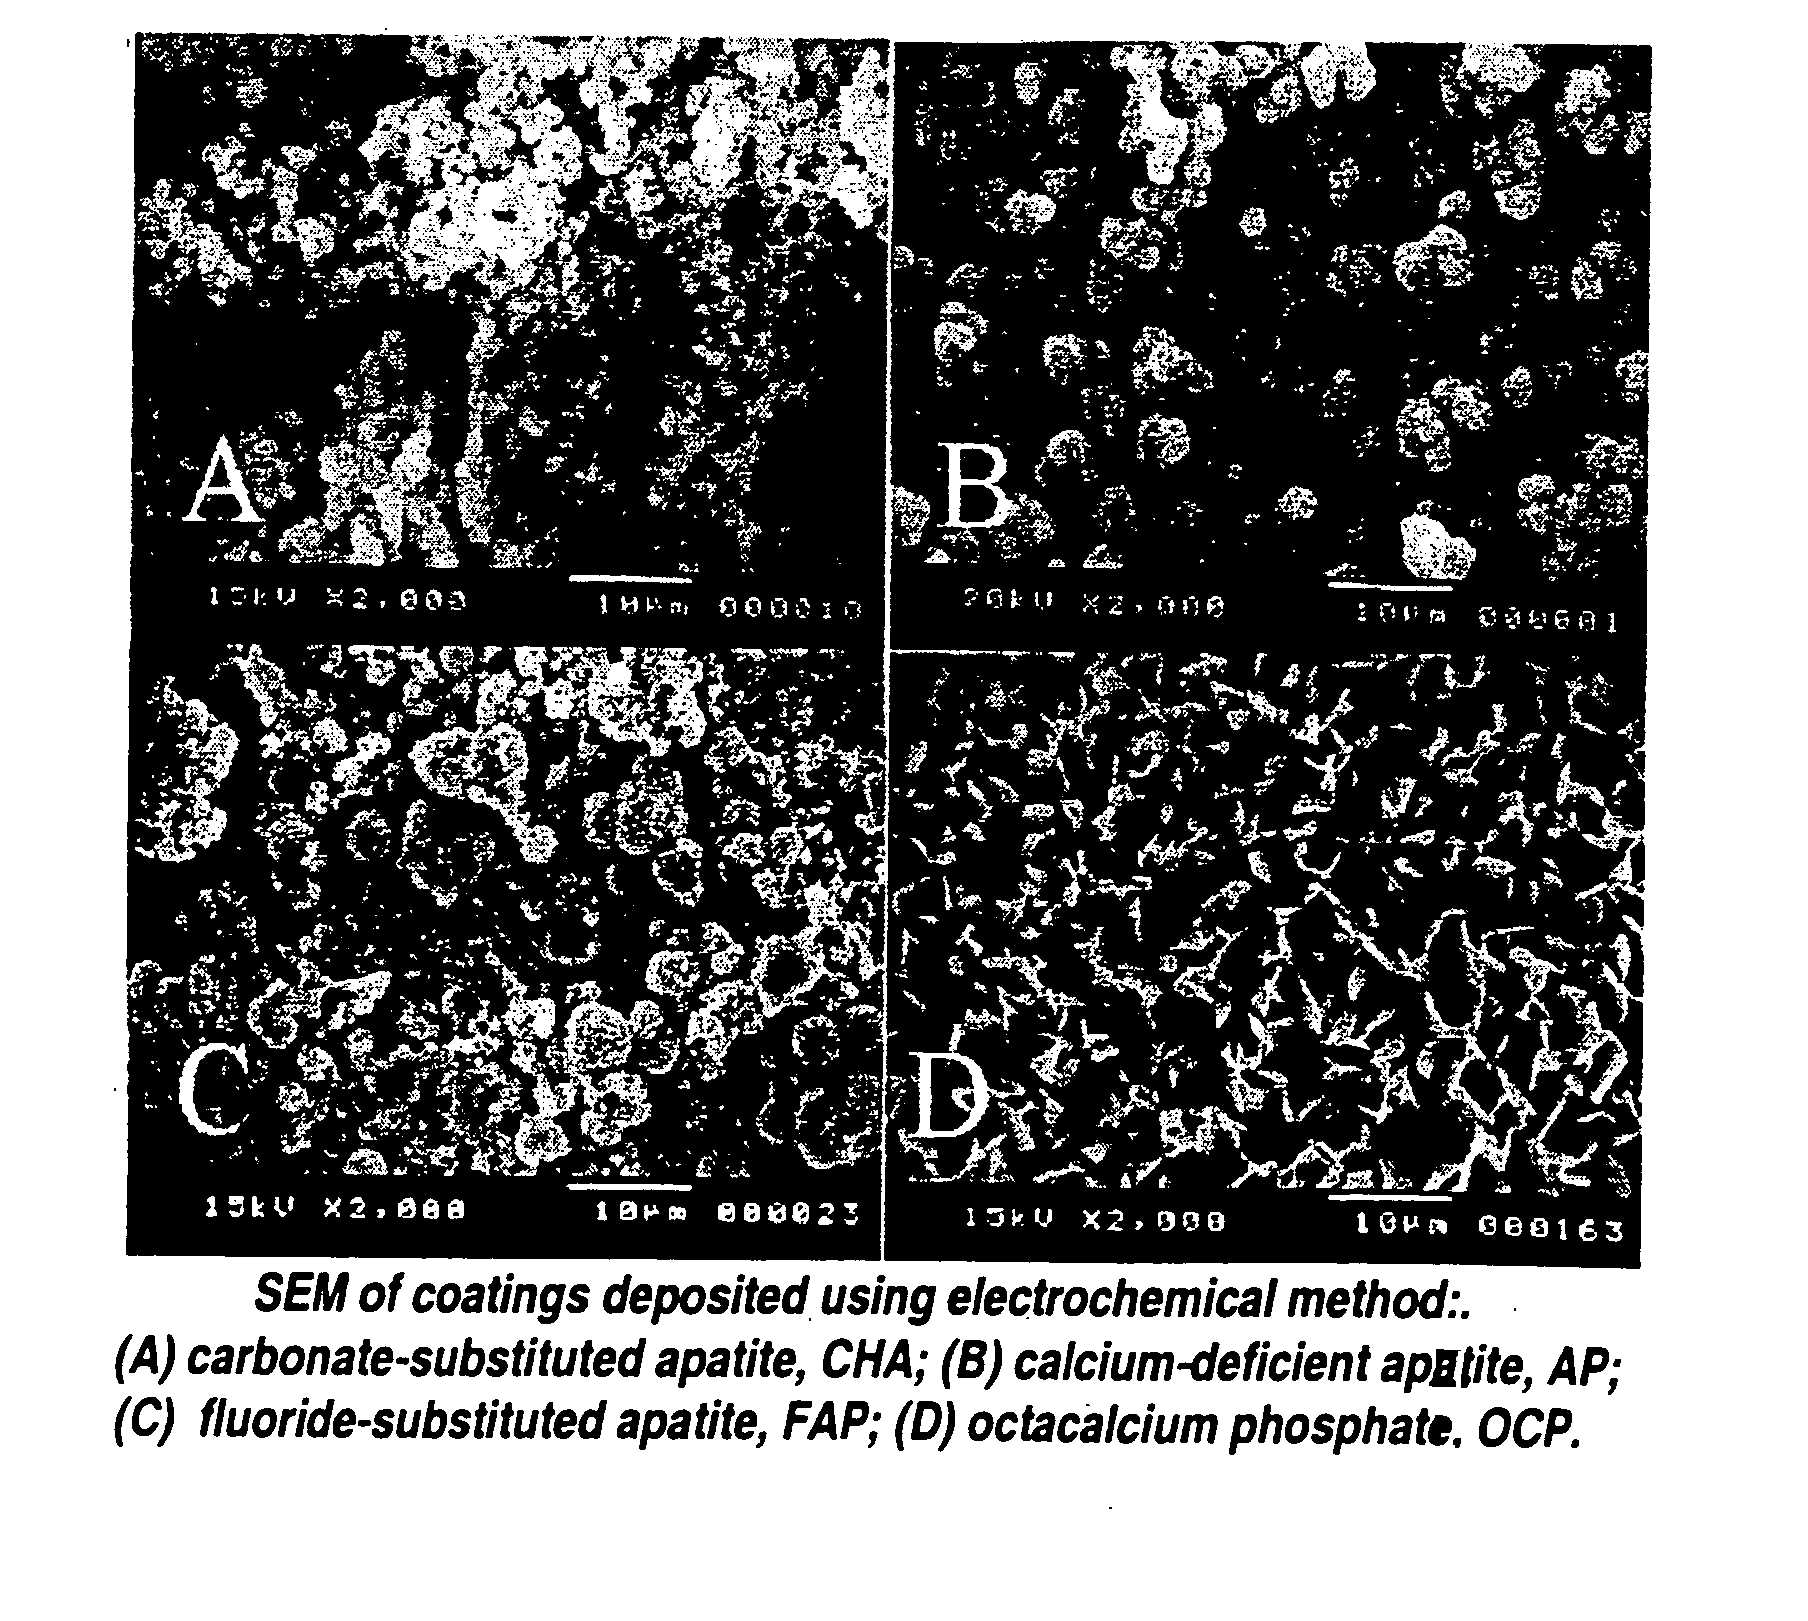 Method for producing adherent coatings of calcium phosphate phases on titanium and titanium alloy substrates by electrochemical deposition